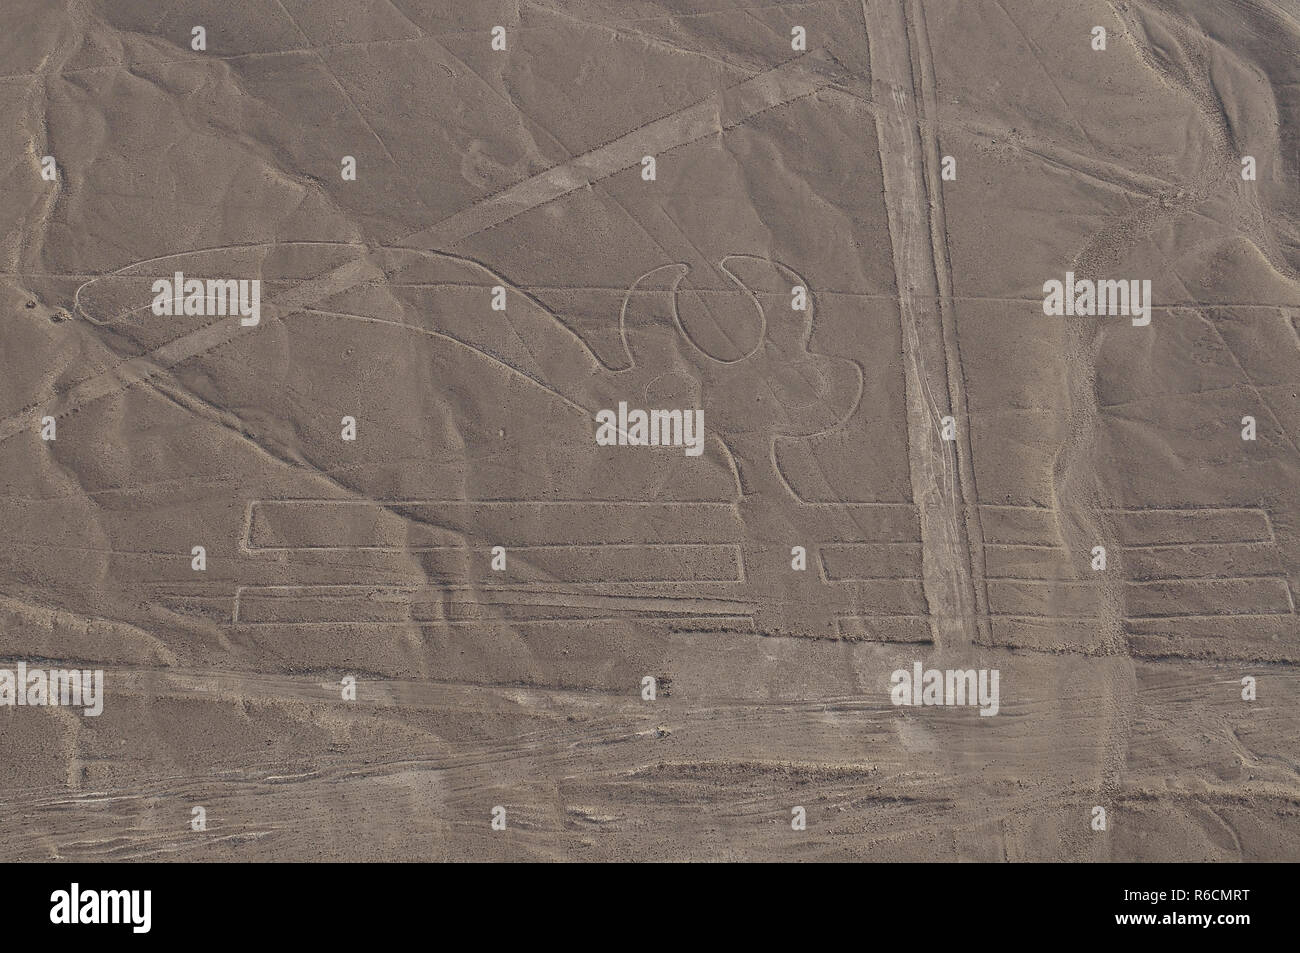 Peru, Lines Of Nasca, Aerial View, The Pelican Stock Photo